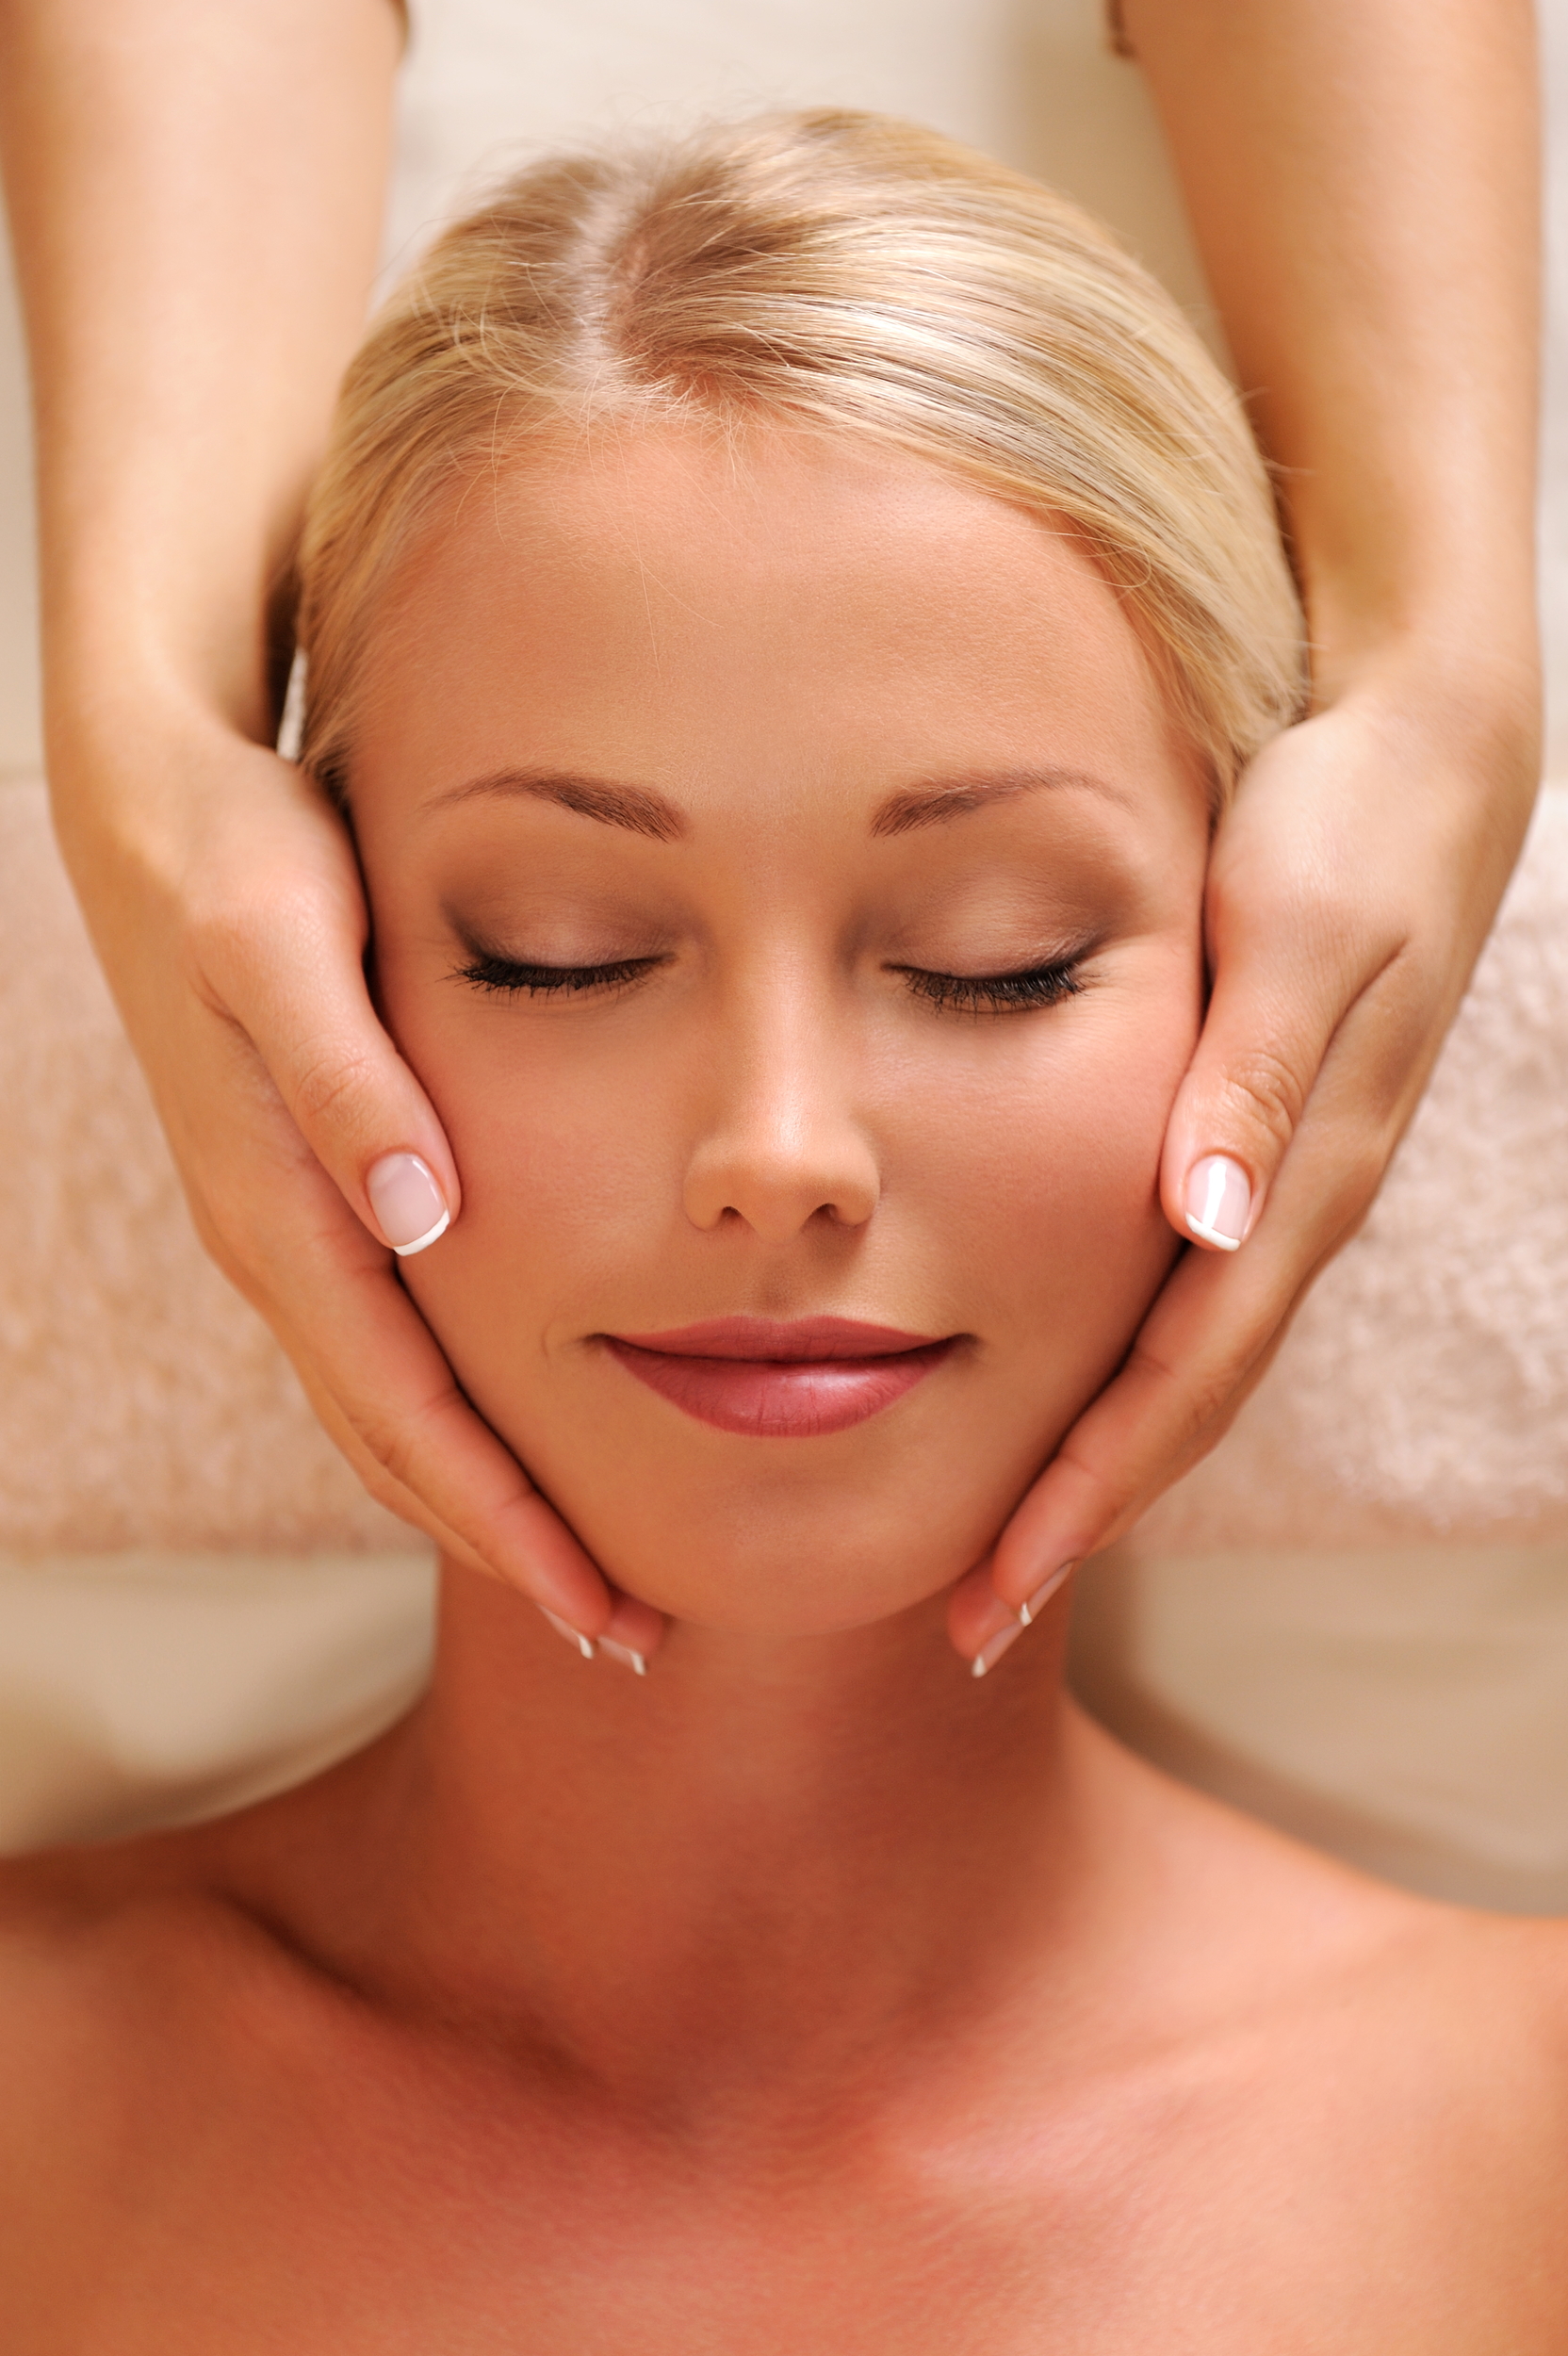 close-up-portrait-of-pretty-female-face-getting-relaxation-massage-of-head